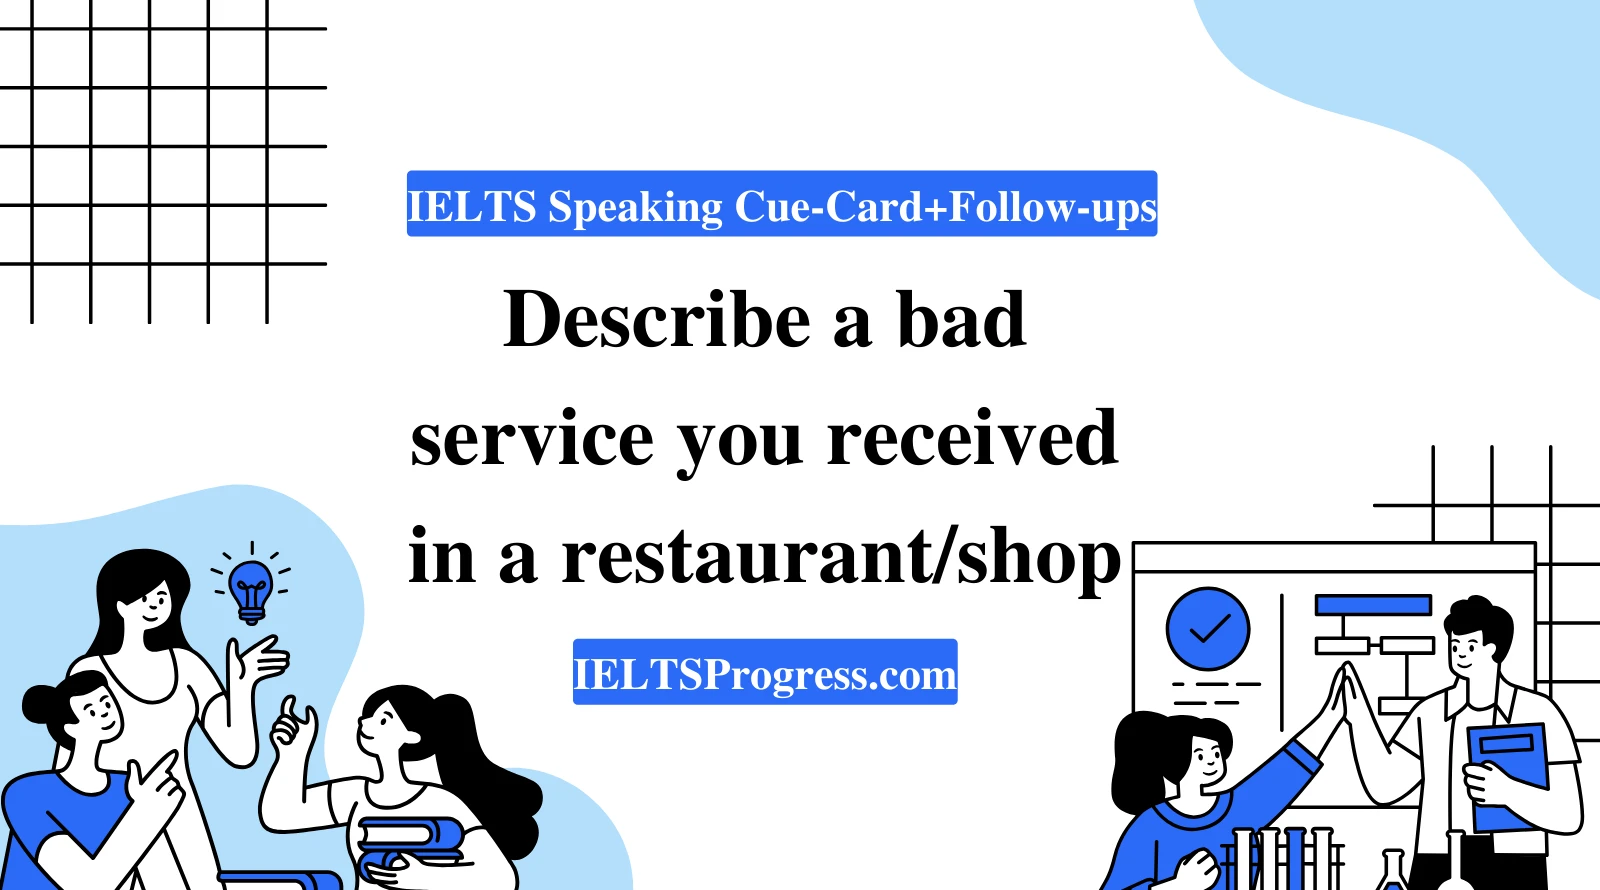 Describe a bad service you received in a restaurant/shop IELTS Speaking cue card answer